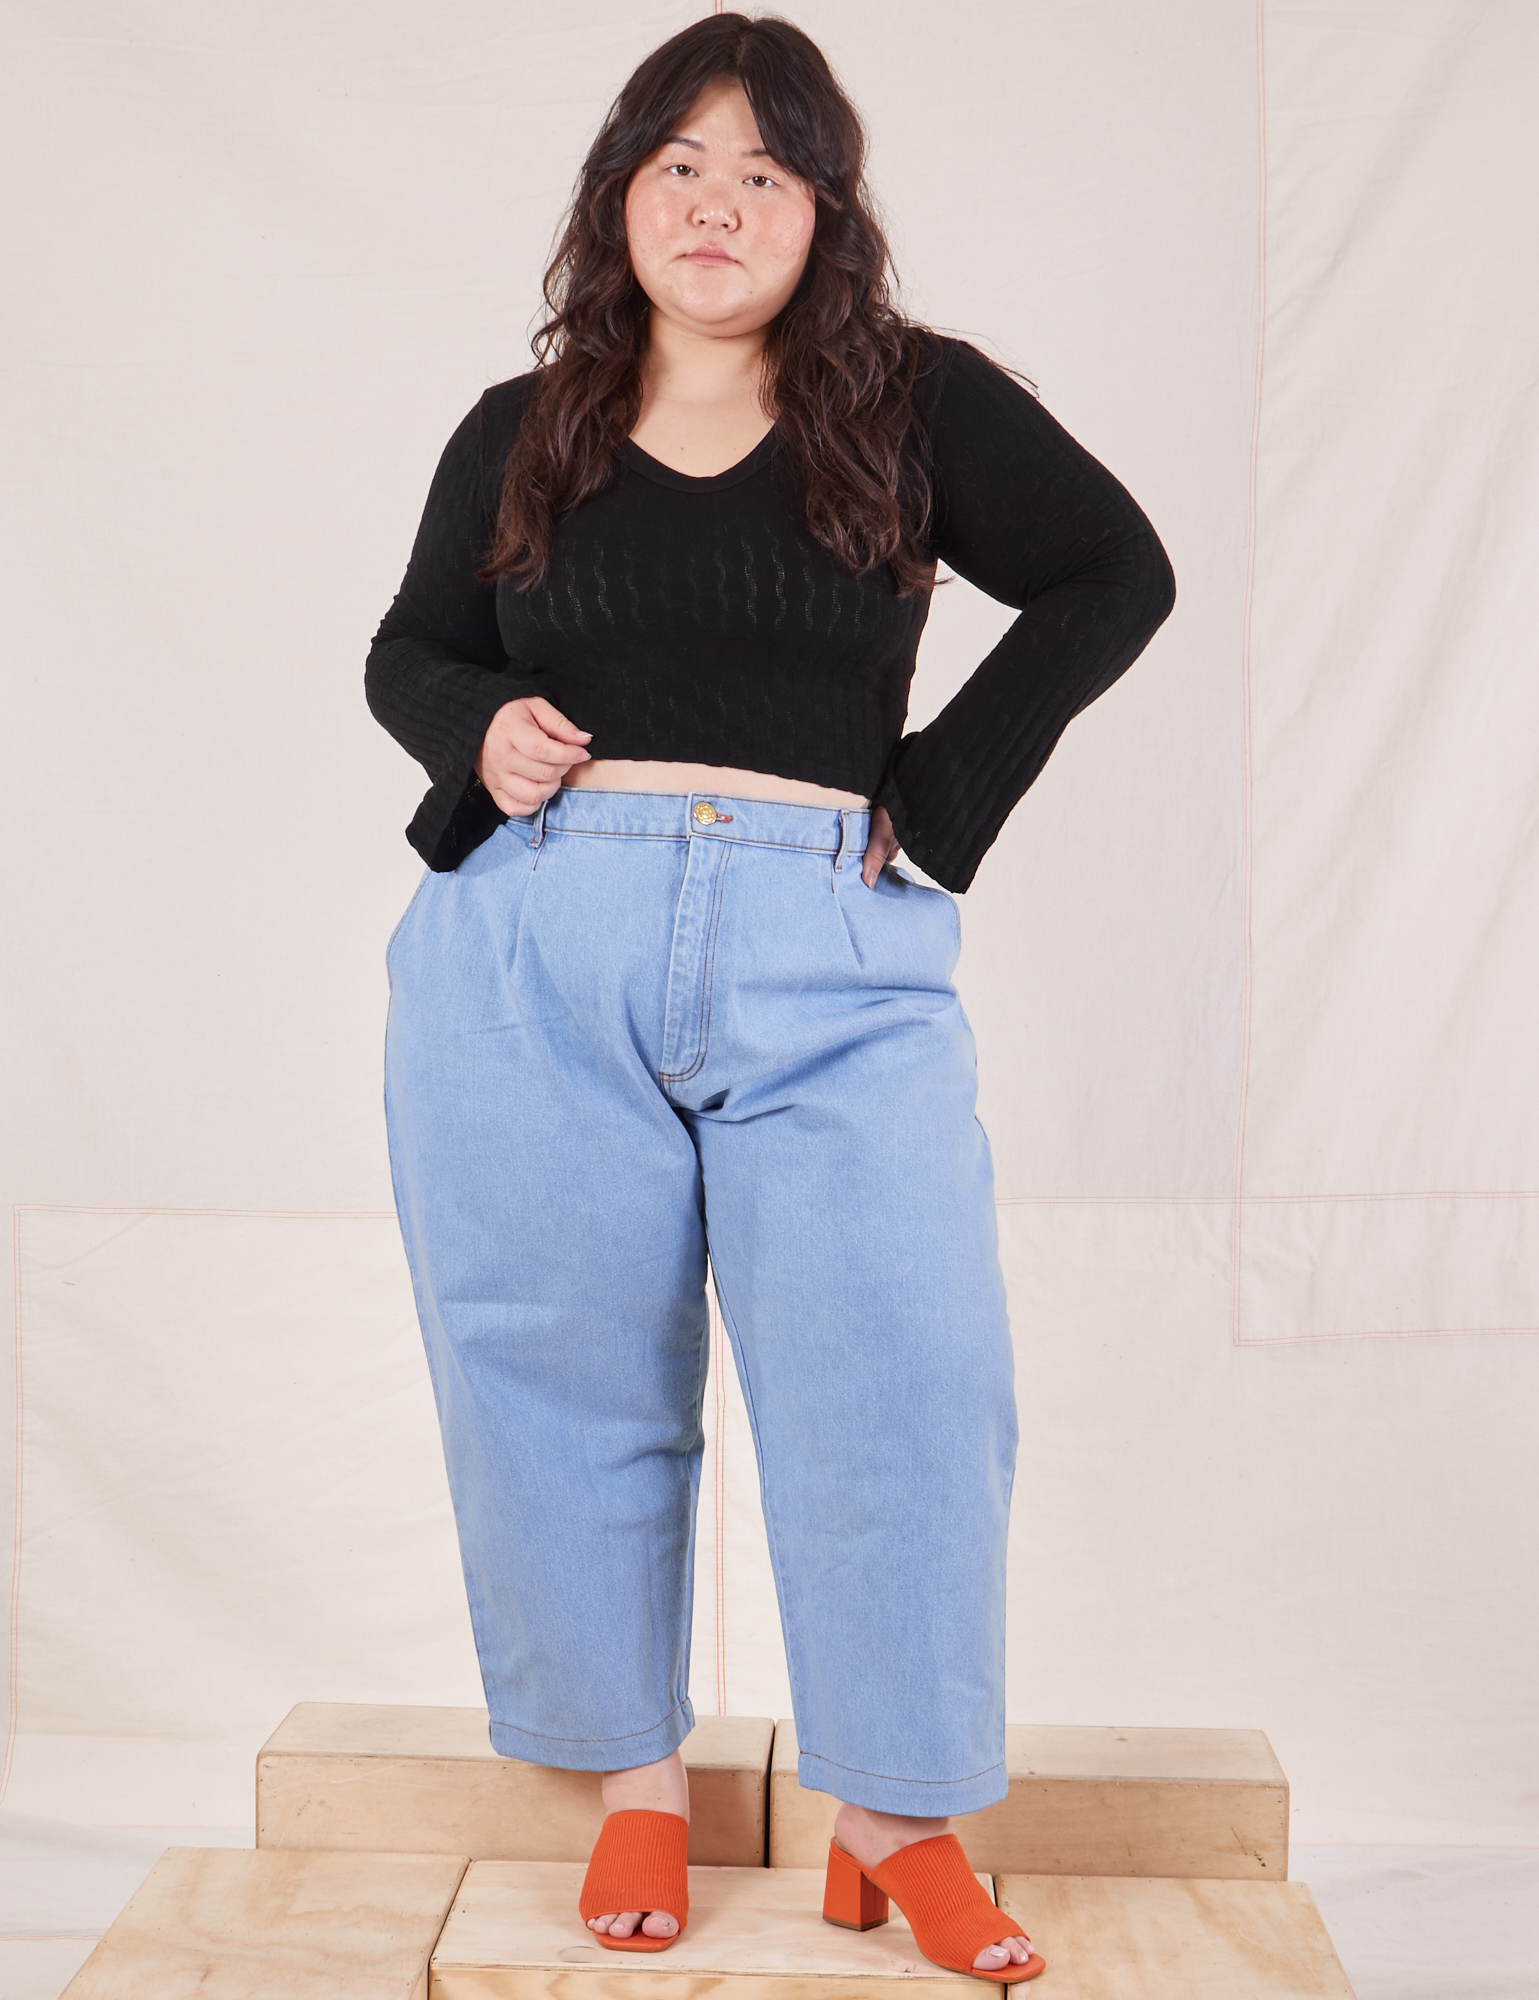 Ashley is wearing Bell Sleeve Top in Basic Black and light wash Trouser Jeans